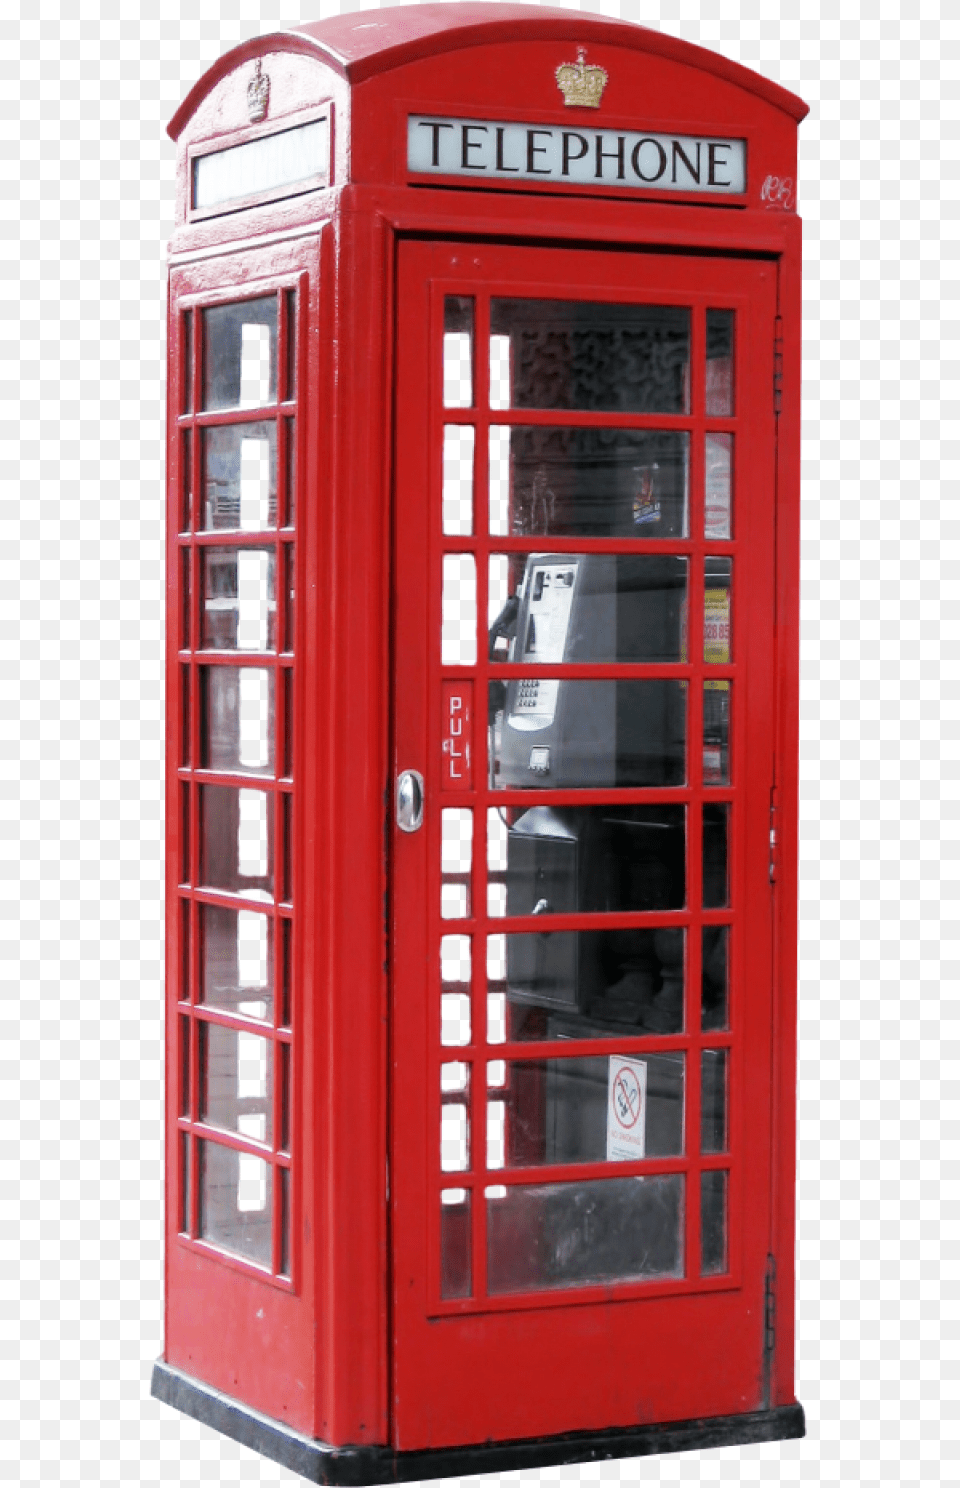 Phone Booth Image London Telephone Booth, Kiosk, Phone Booth Png